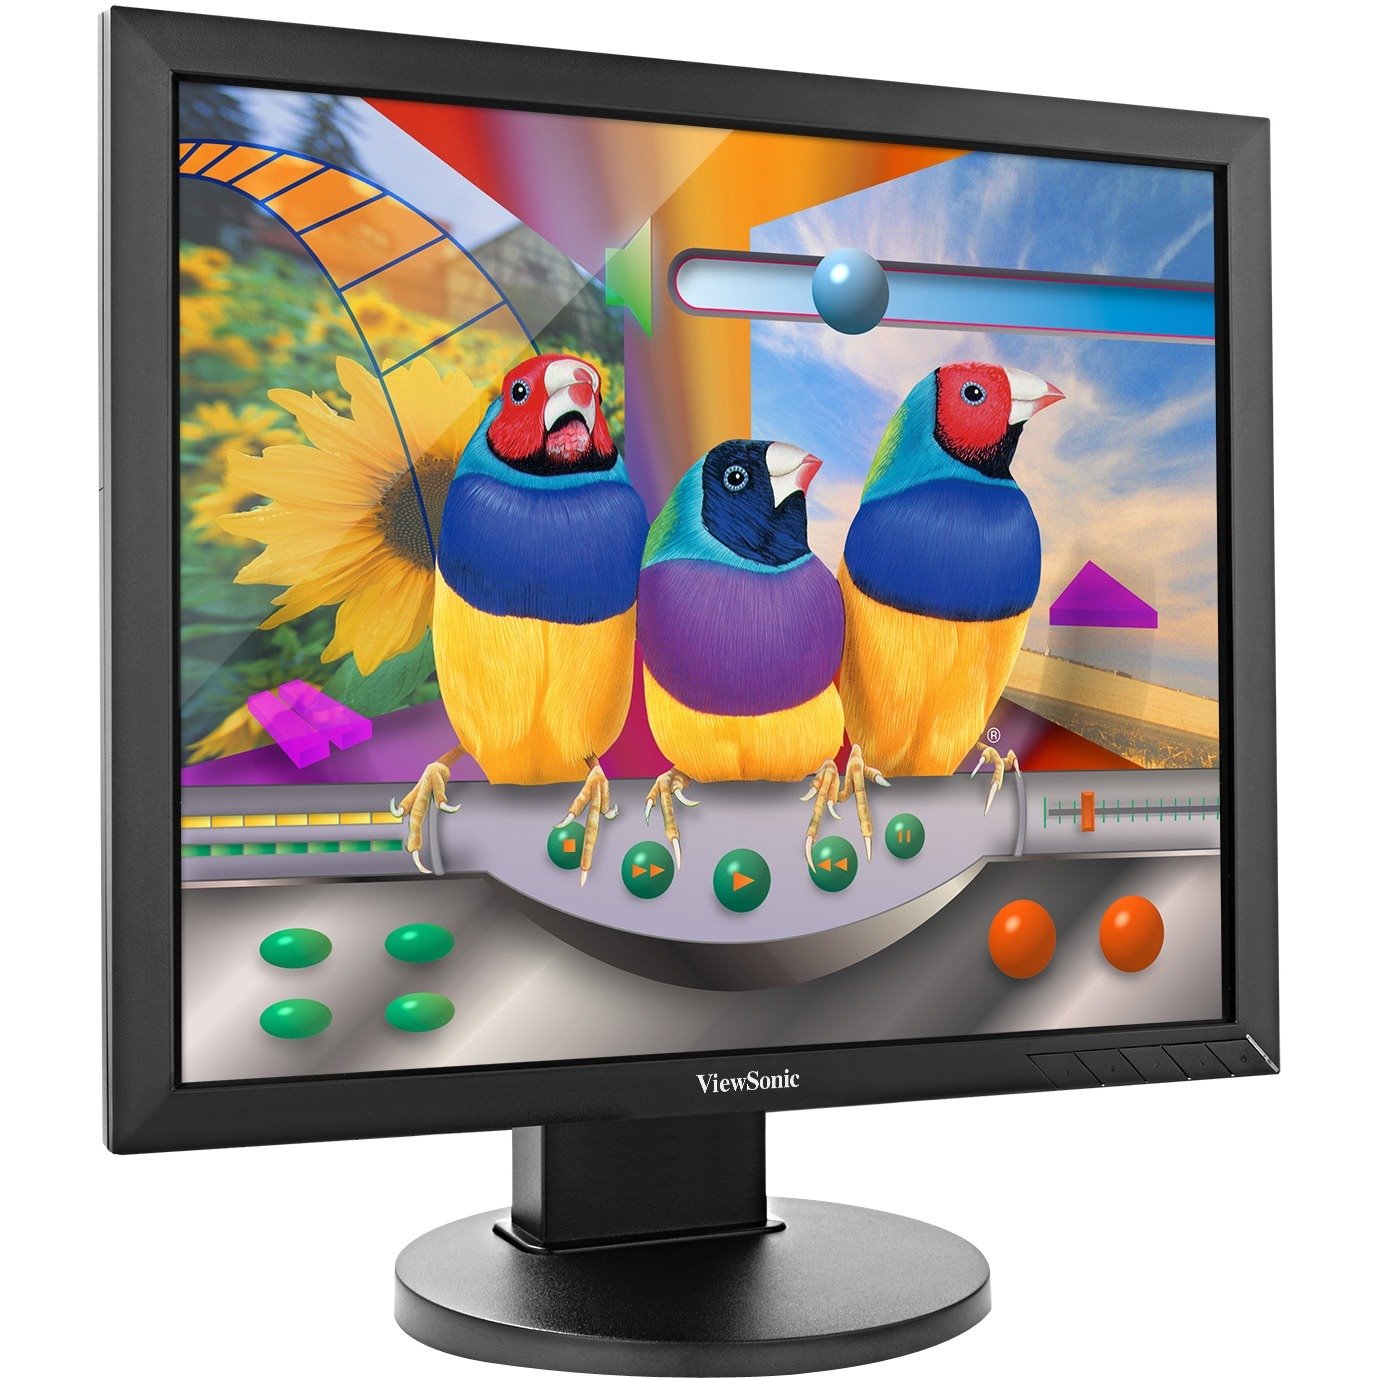 ViewSonic VG939SM 19 Inch IPS 1024p Ergonomic Monitor with DVI and VGA for Home and Office